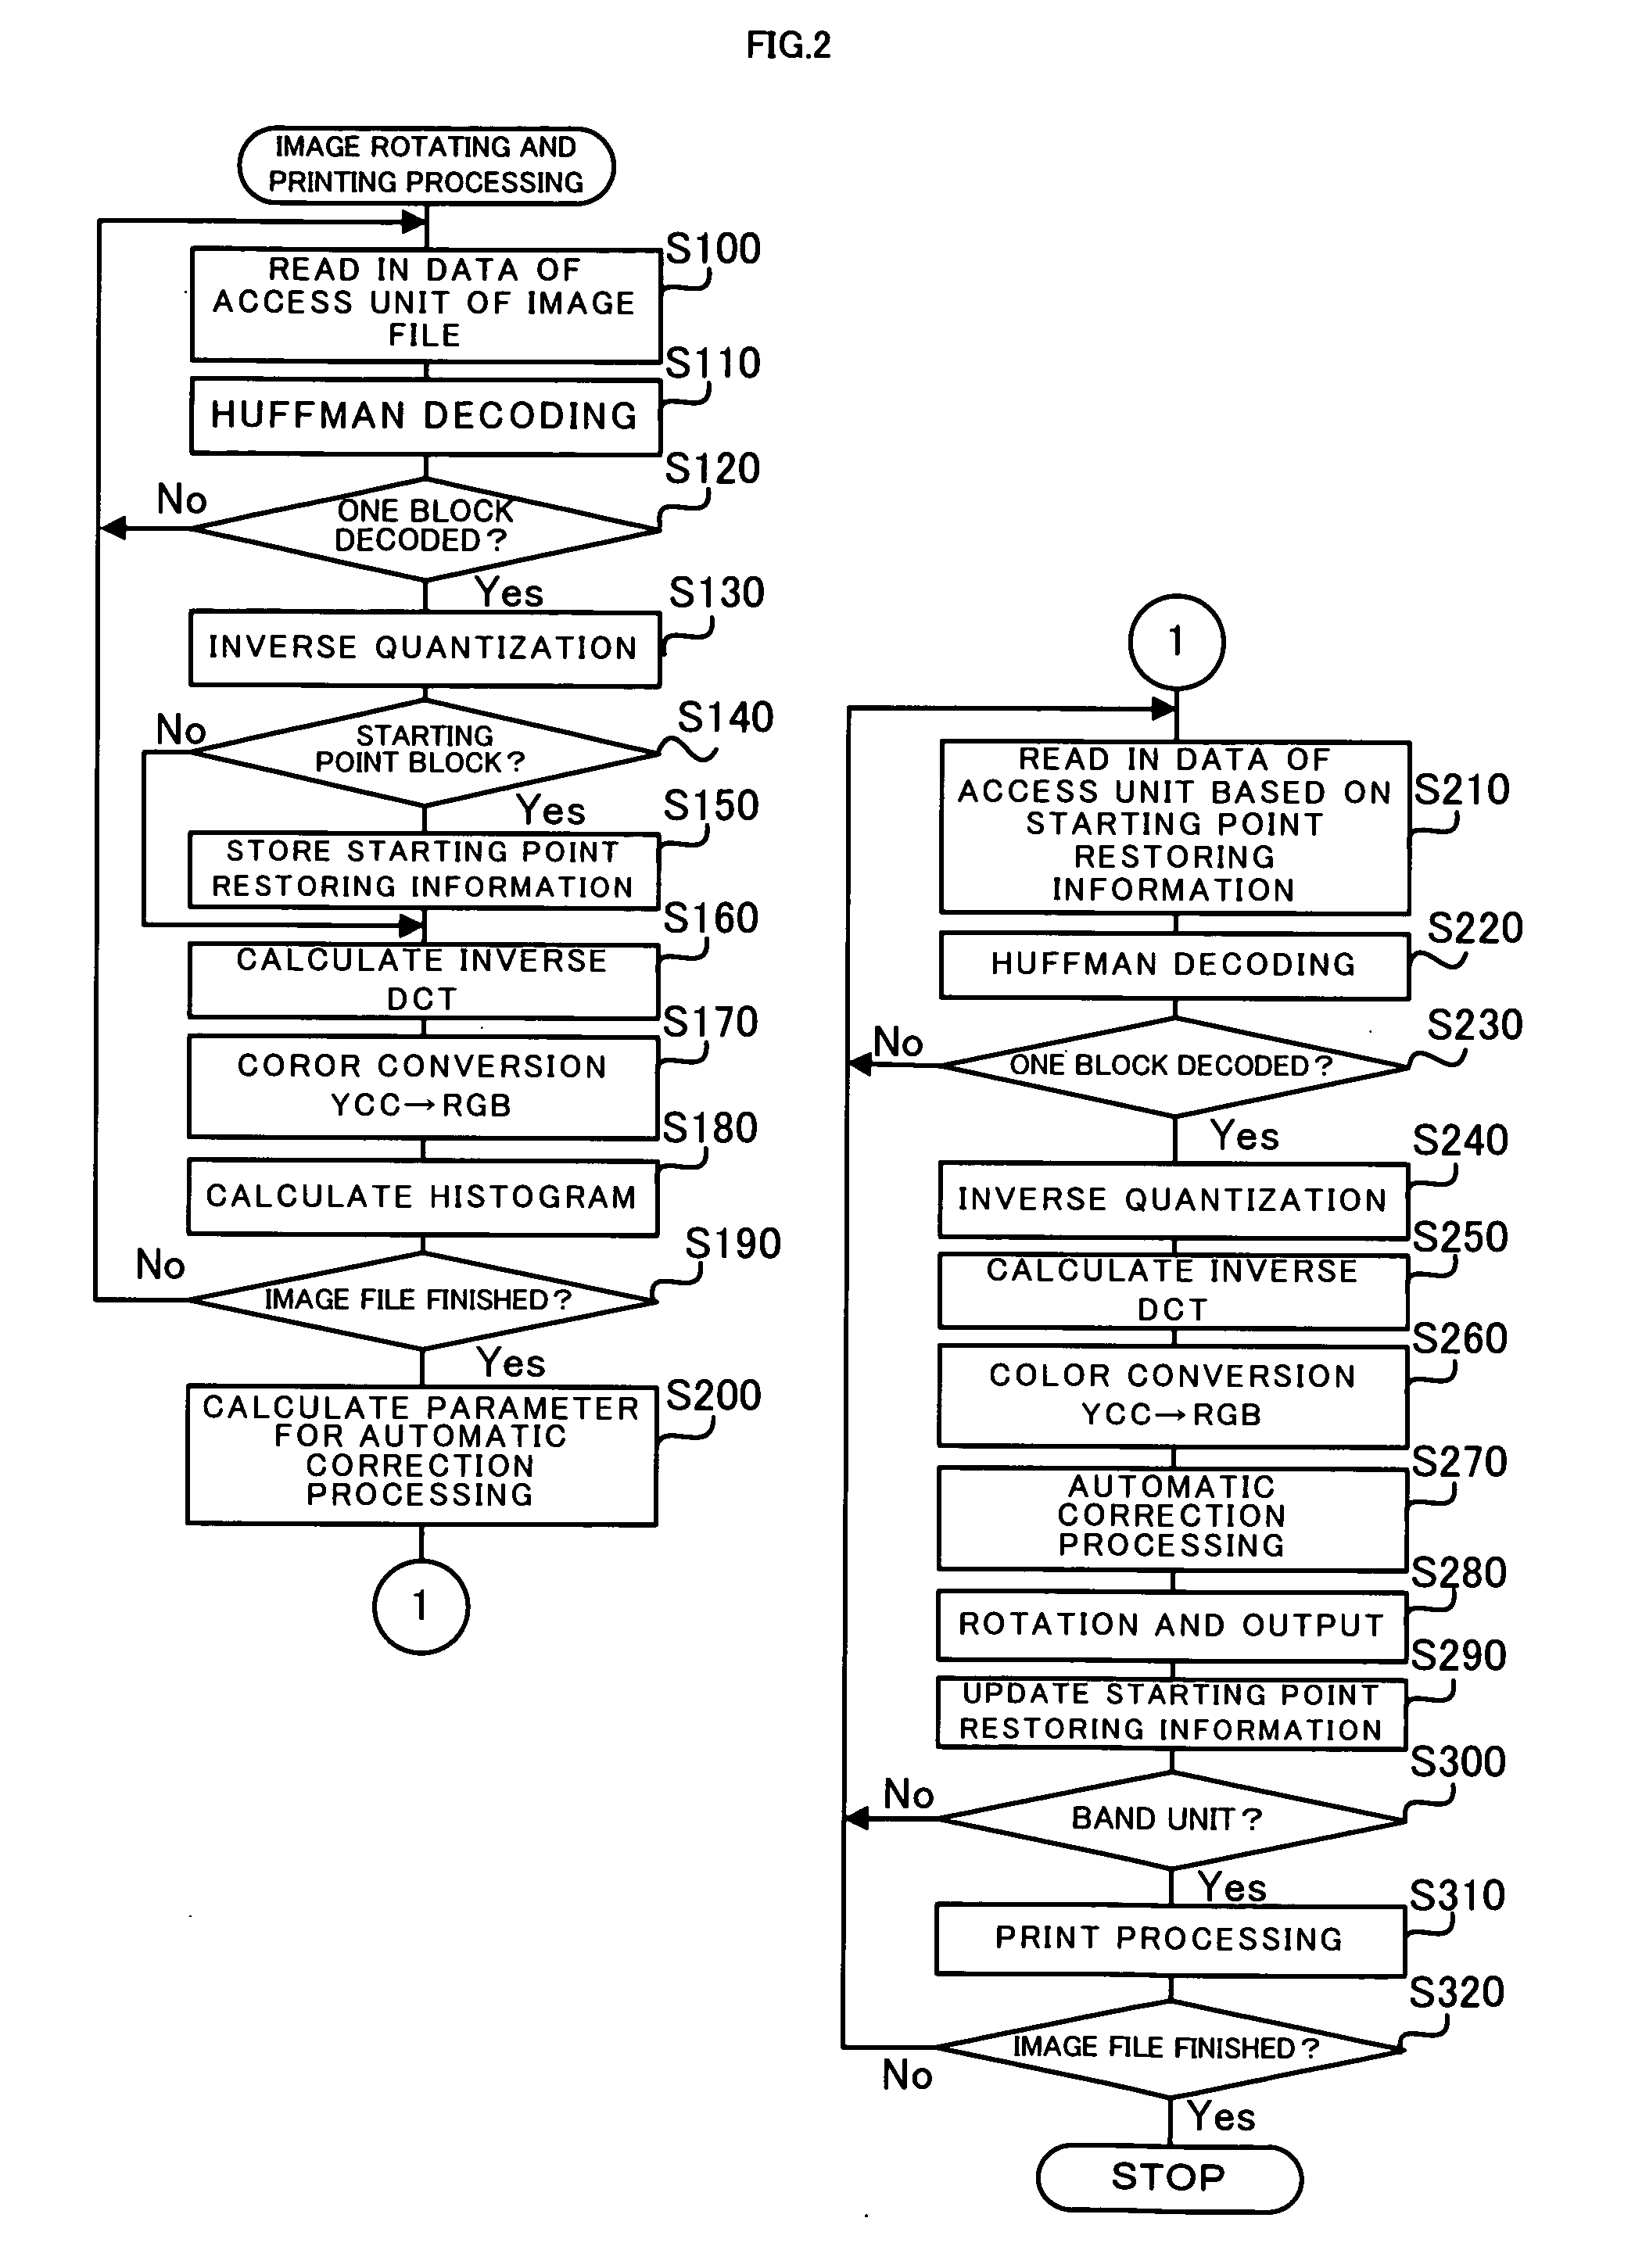 Image processing apparatus, printer and control method of the image processing